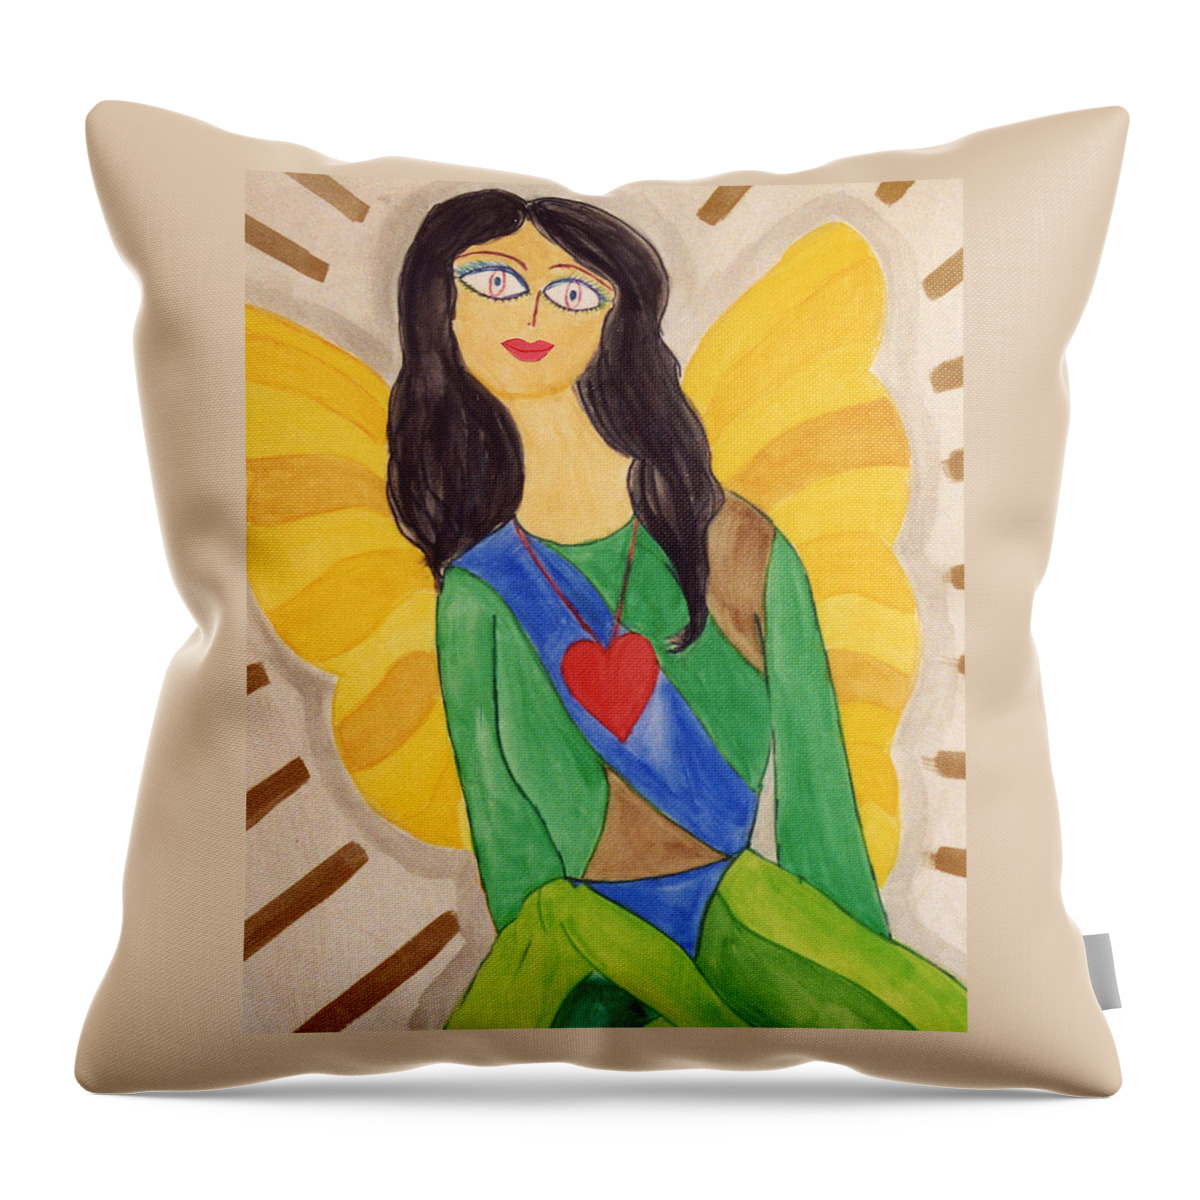 Angels Throw Pillow featuring the digital art Angel with Heart by Laura Smith